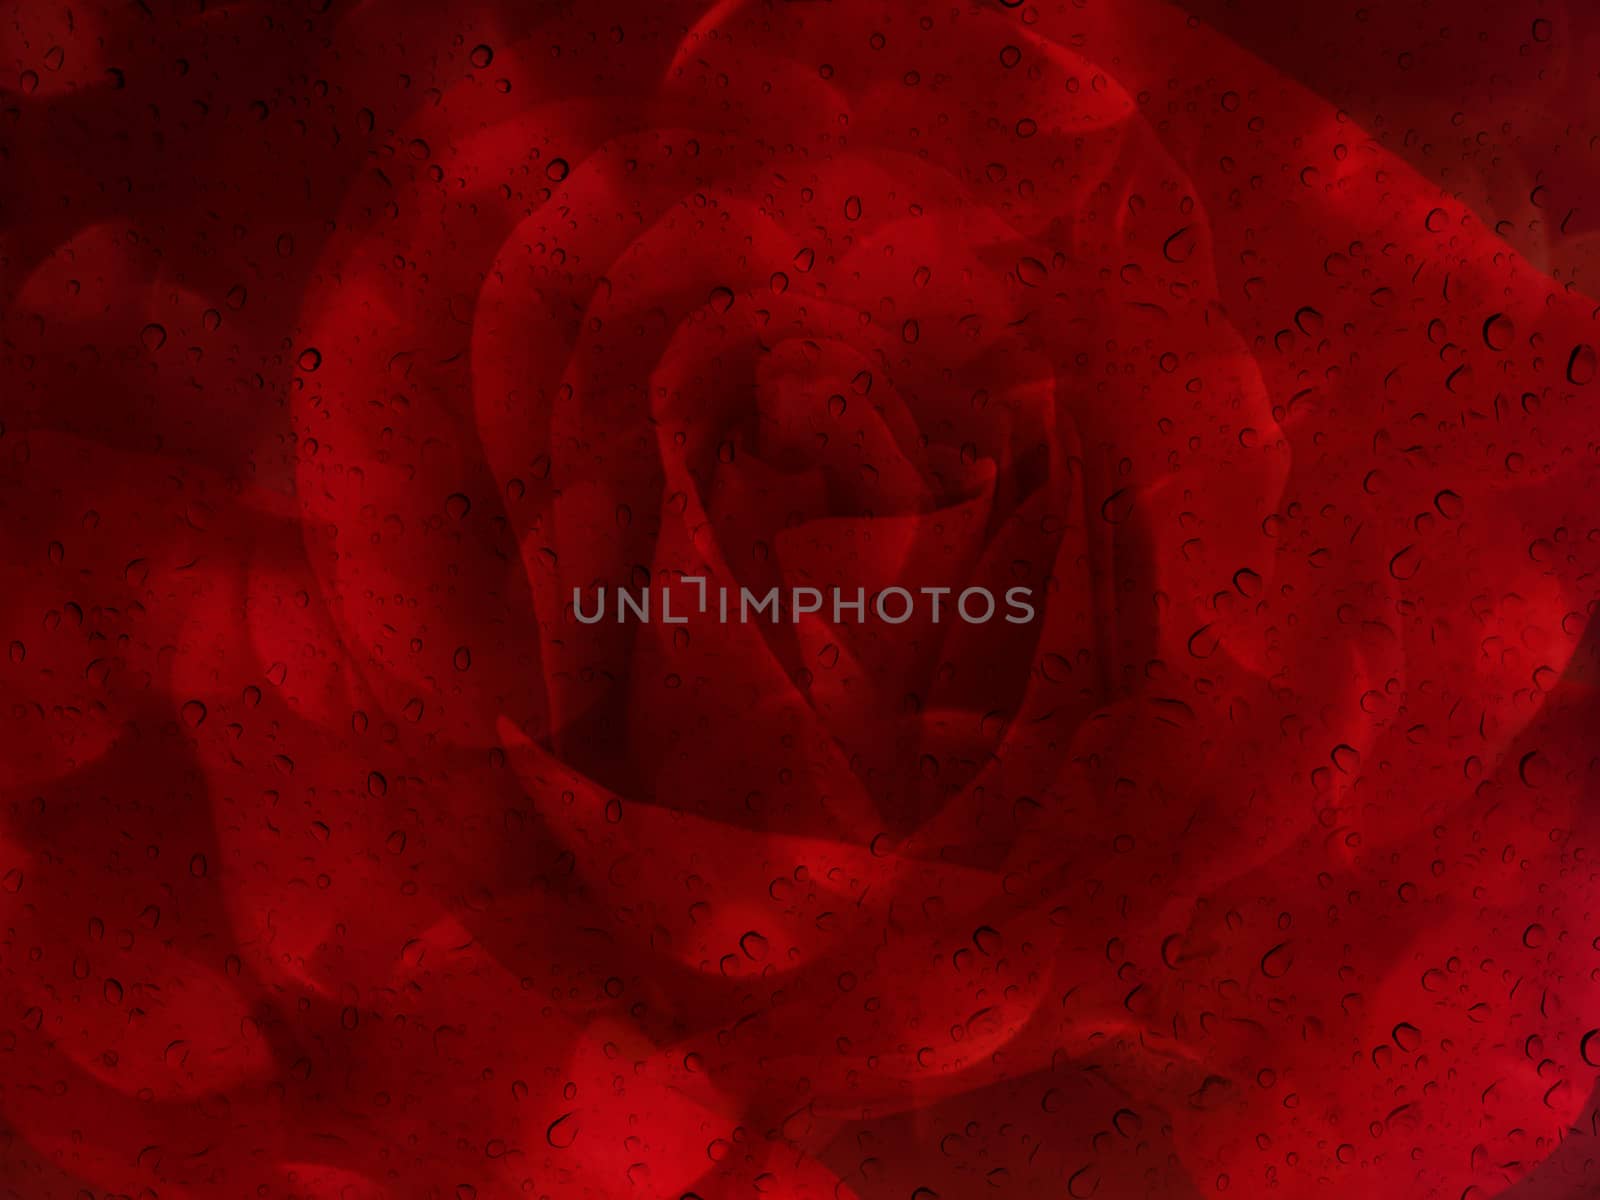 Romantic red rose with water drop on glass mirror plate for abst by KAZITAFAHNIZEER